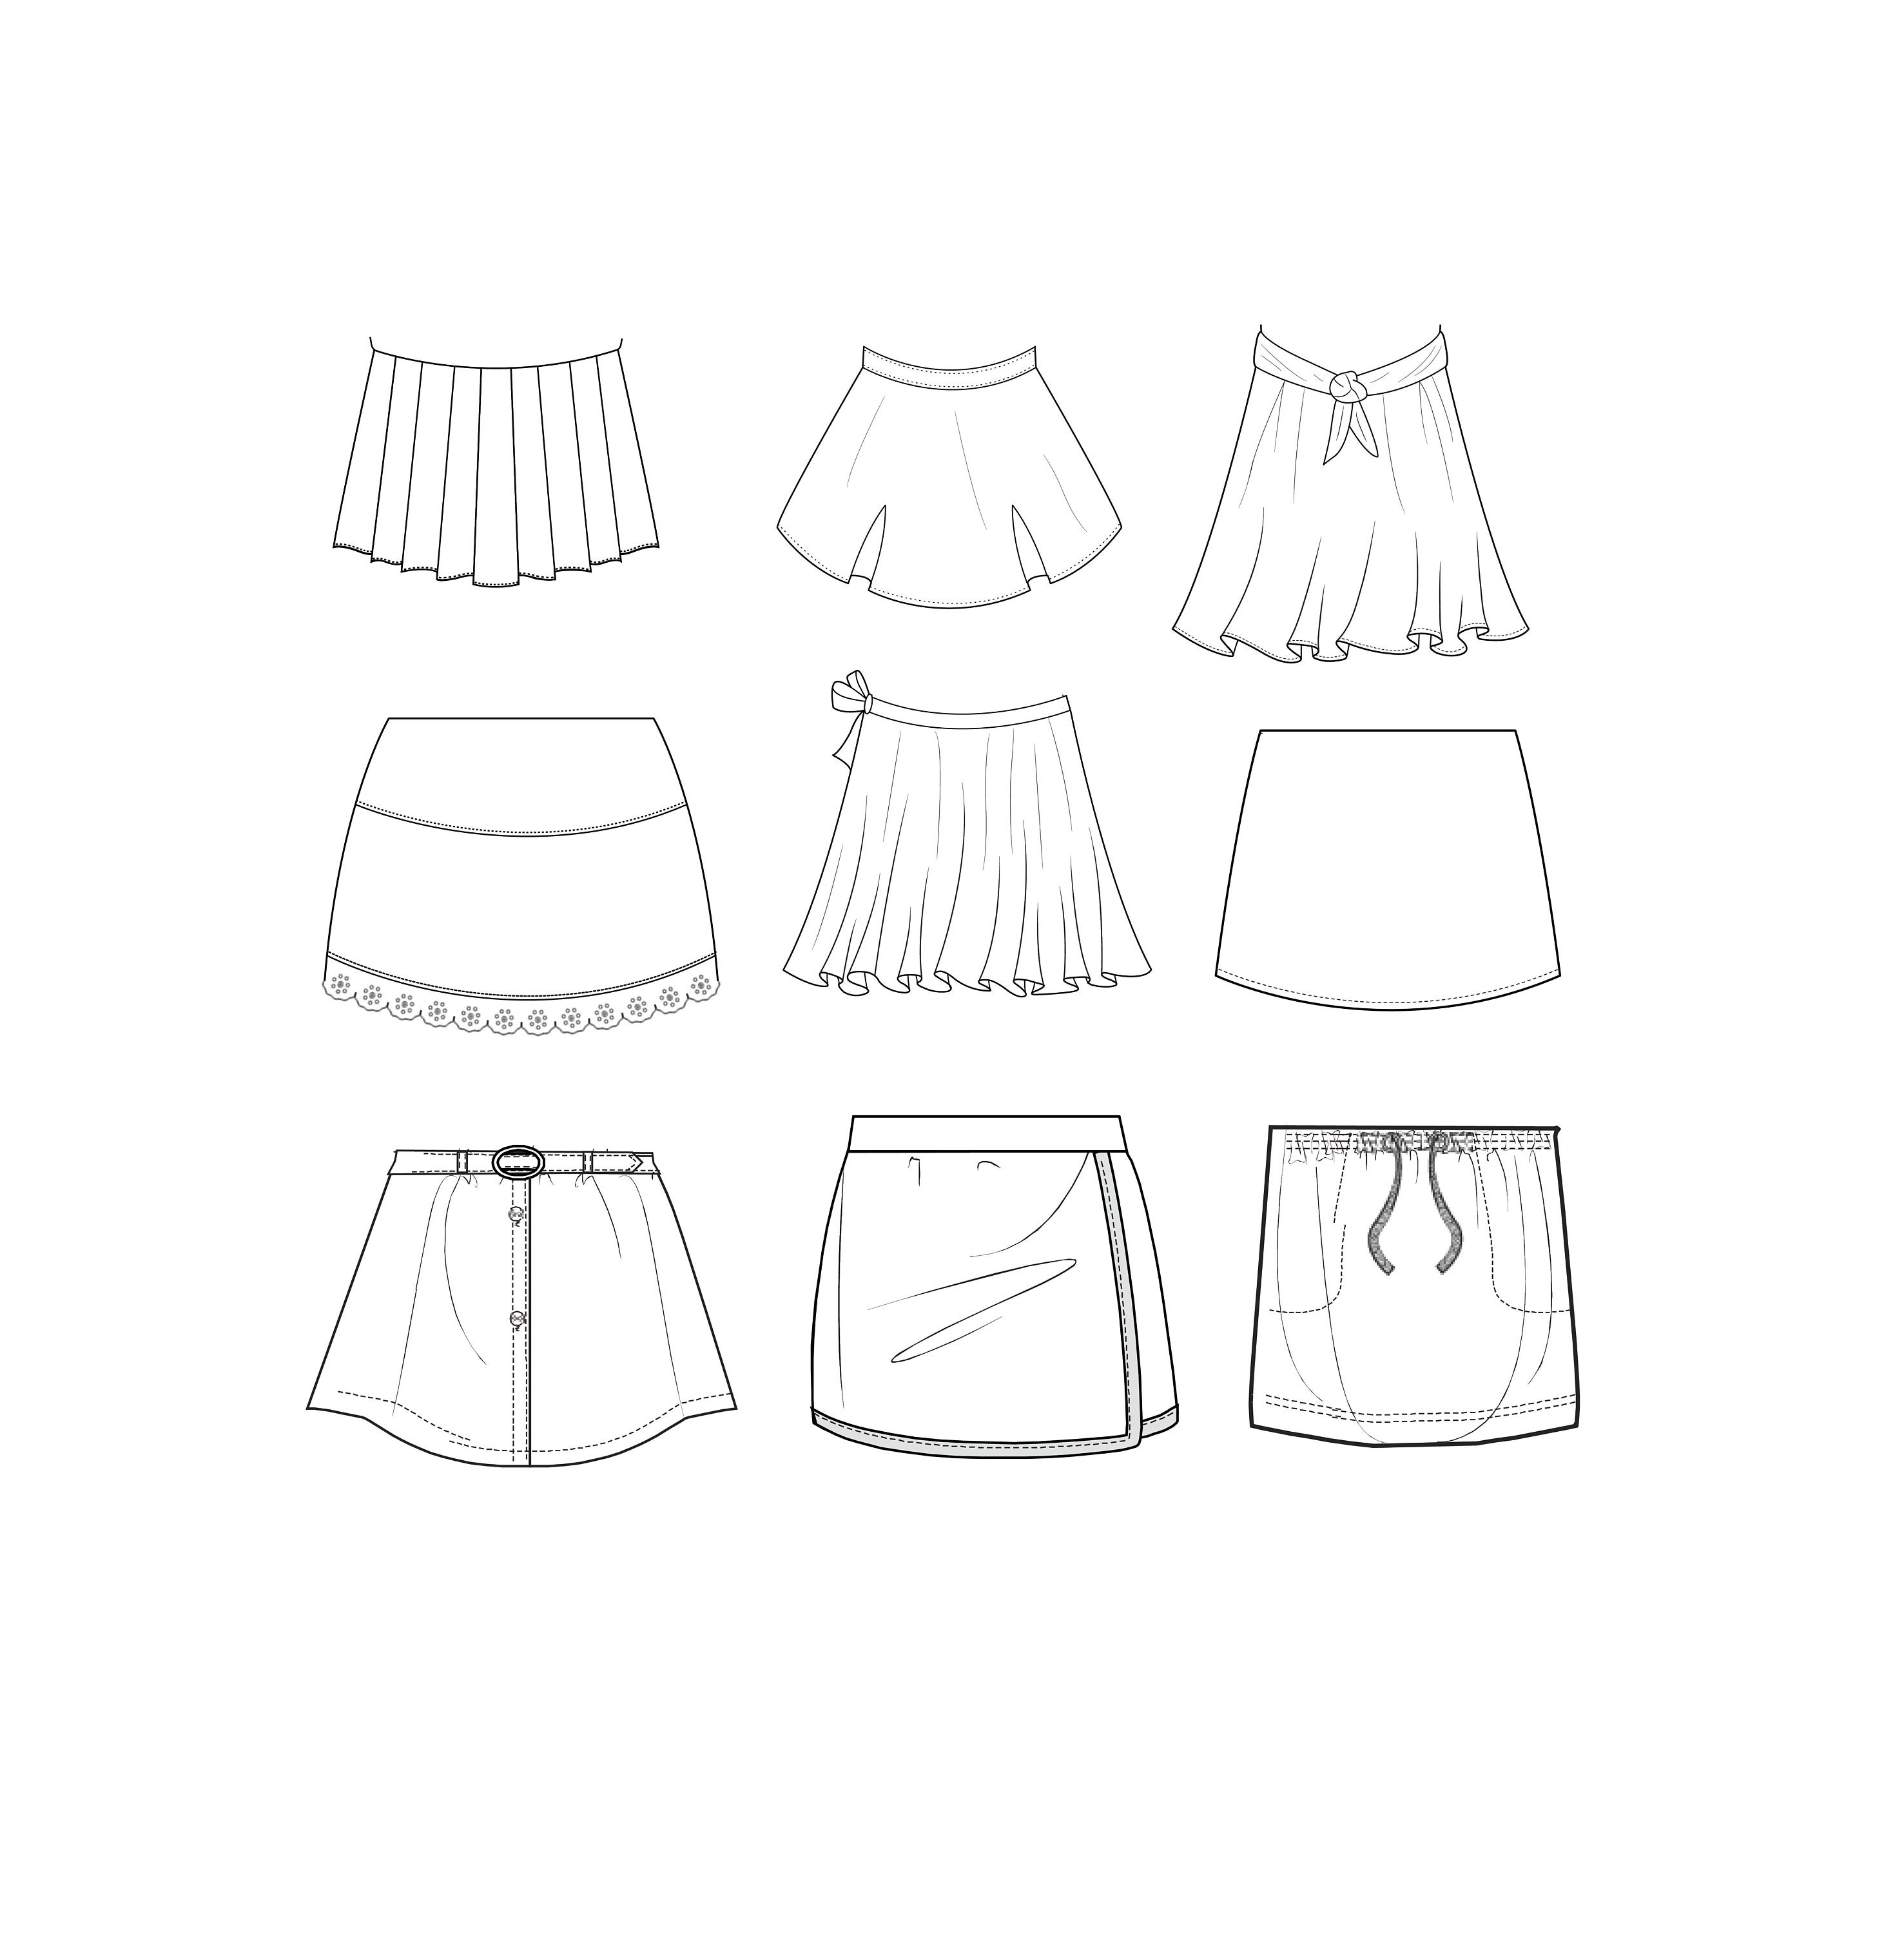 How to draw a flare skirt in fashion sketches | I Draw Fashion - YouTube